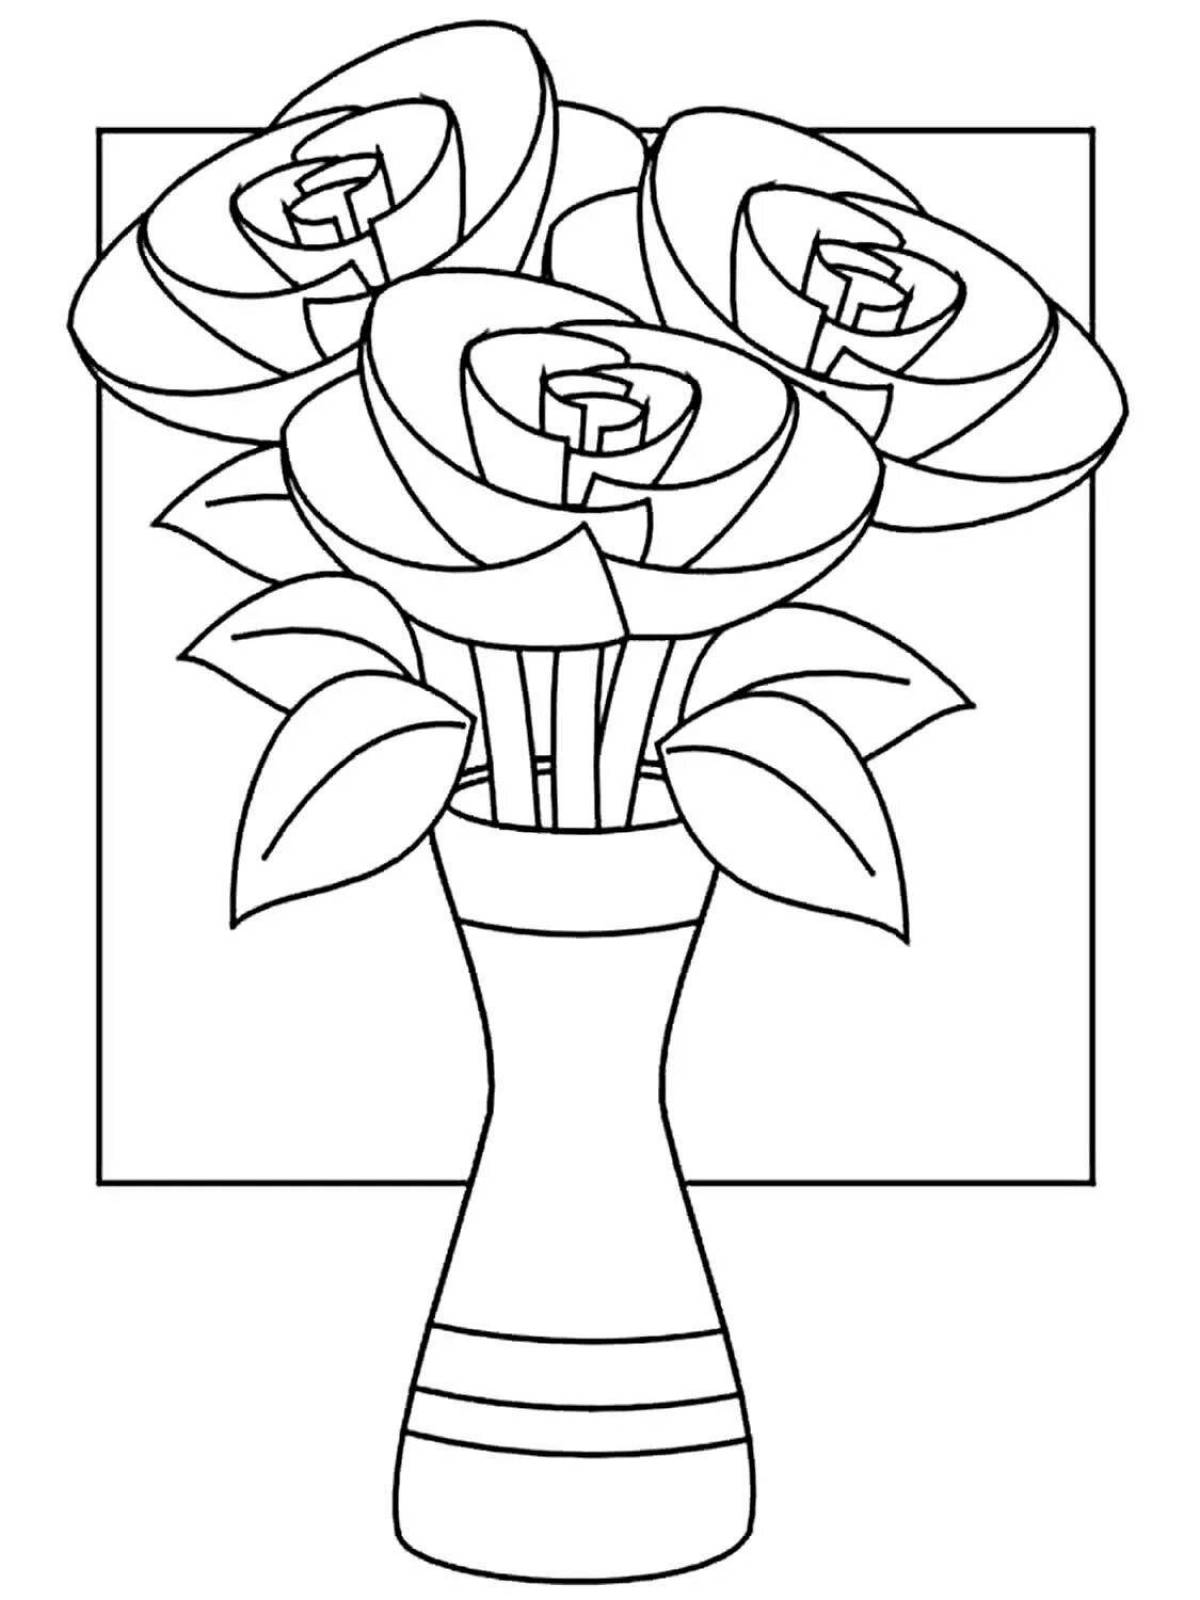 Decorated coloring page flower in a vase